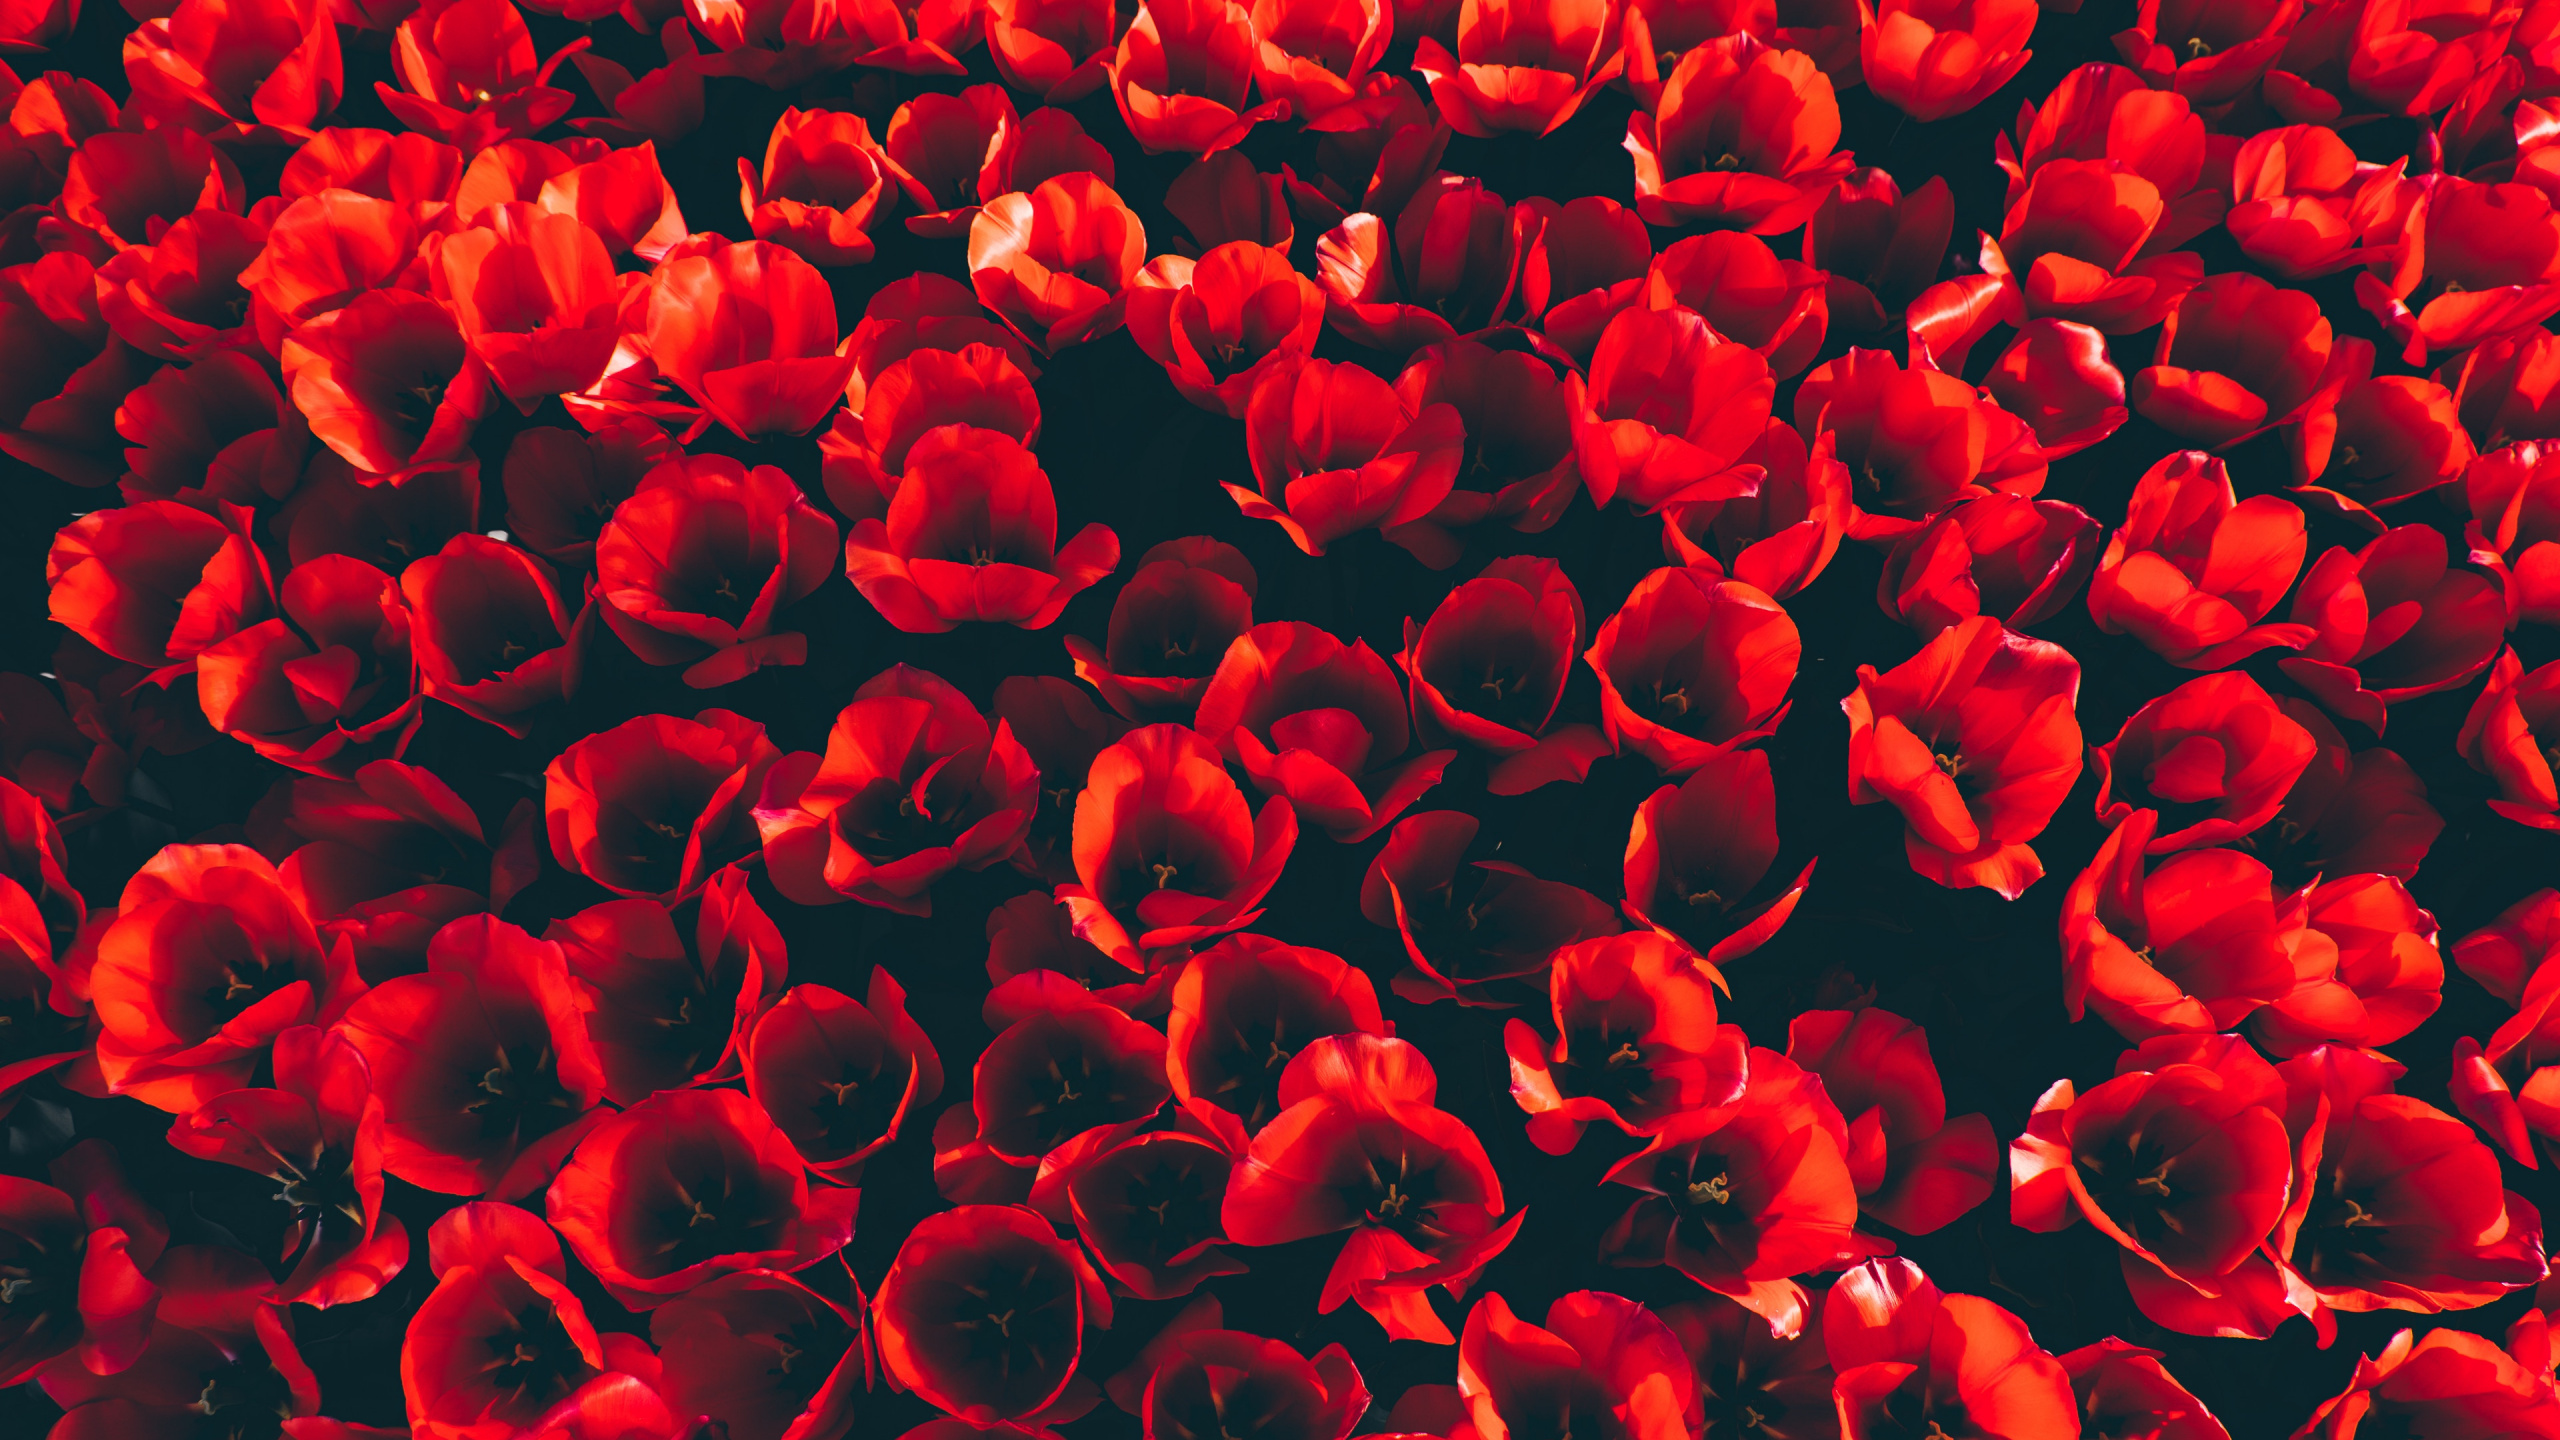 Red Flower Petals in Close up Photography. Wallpaper in 2560x1440 Resolution